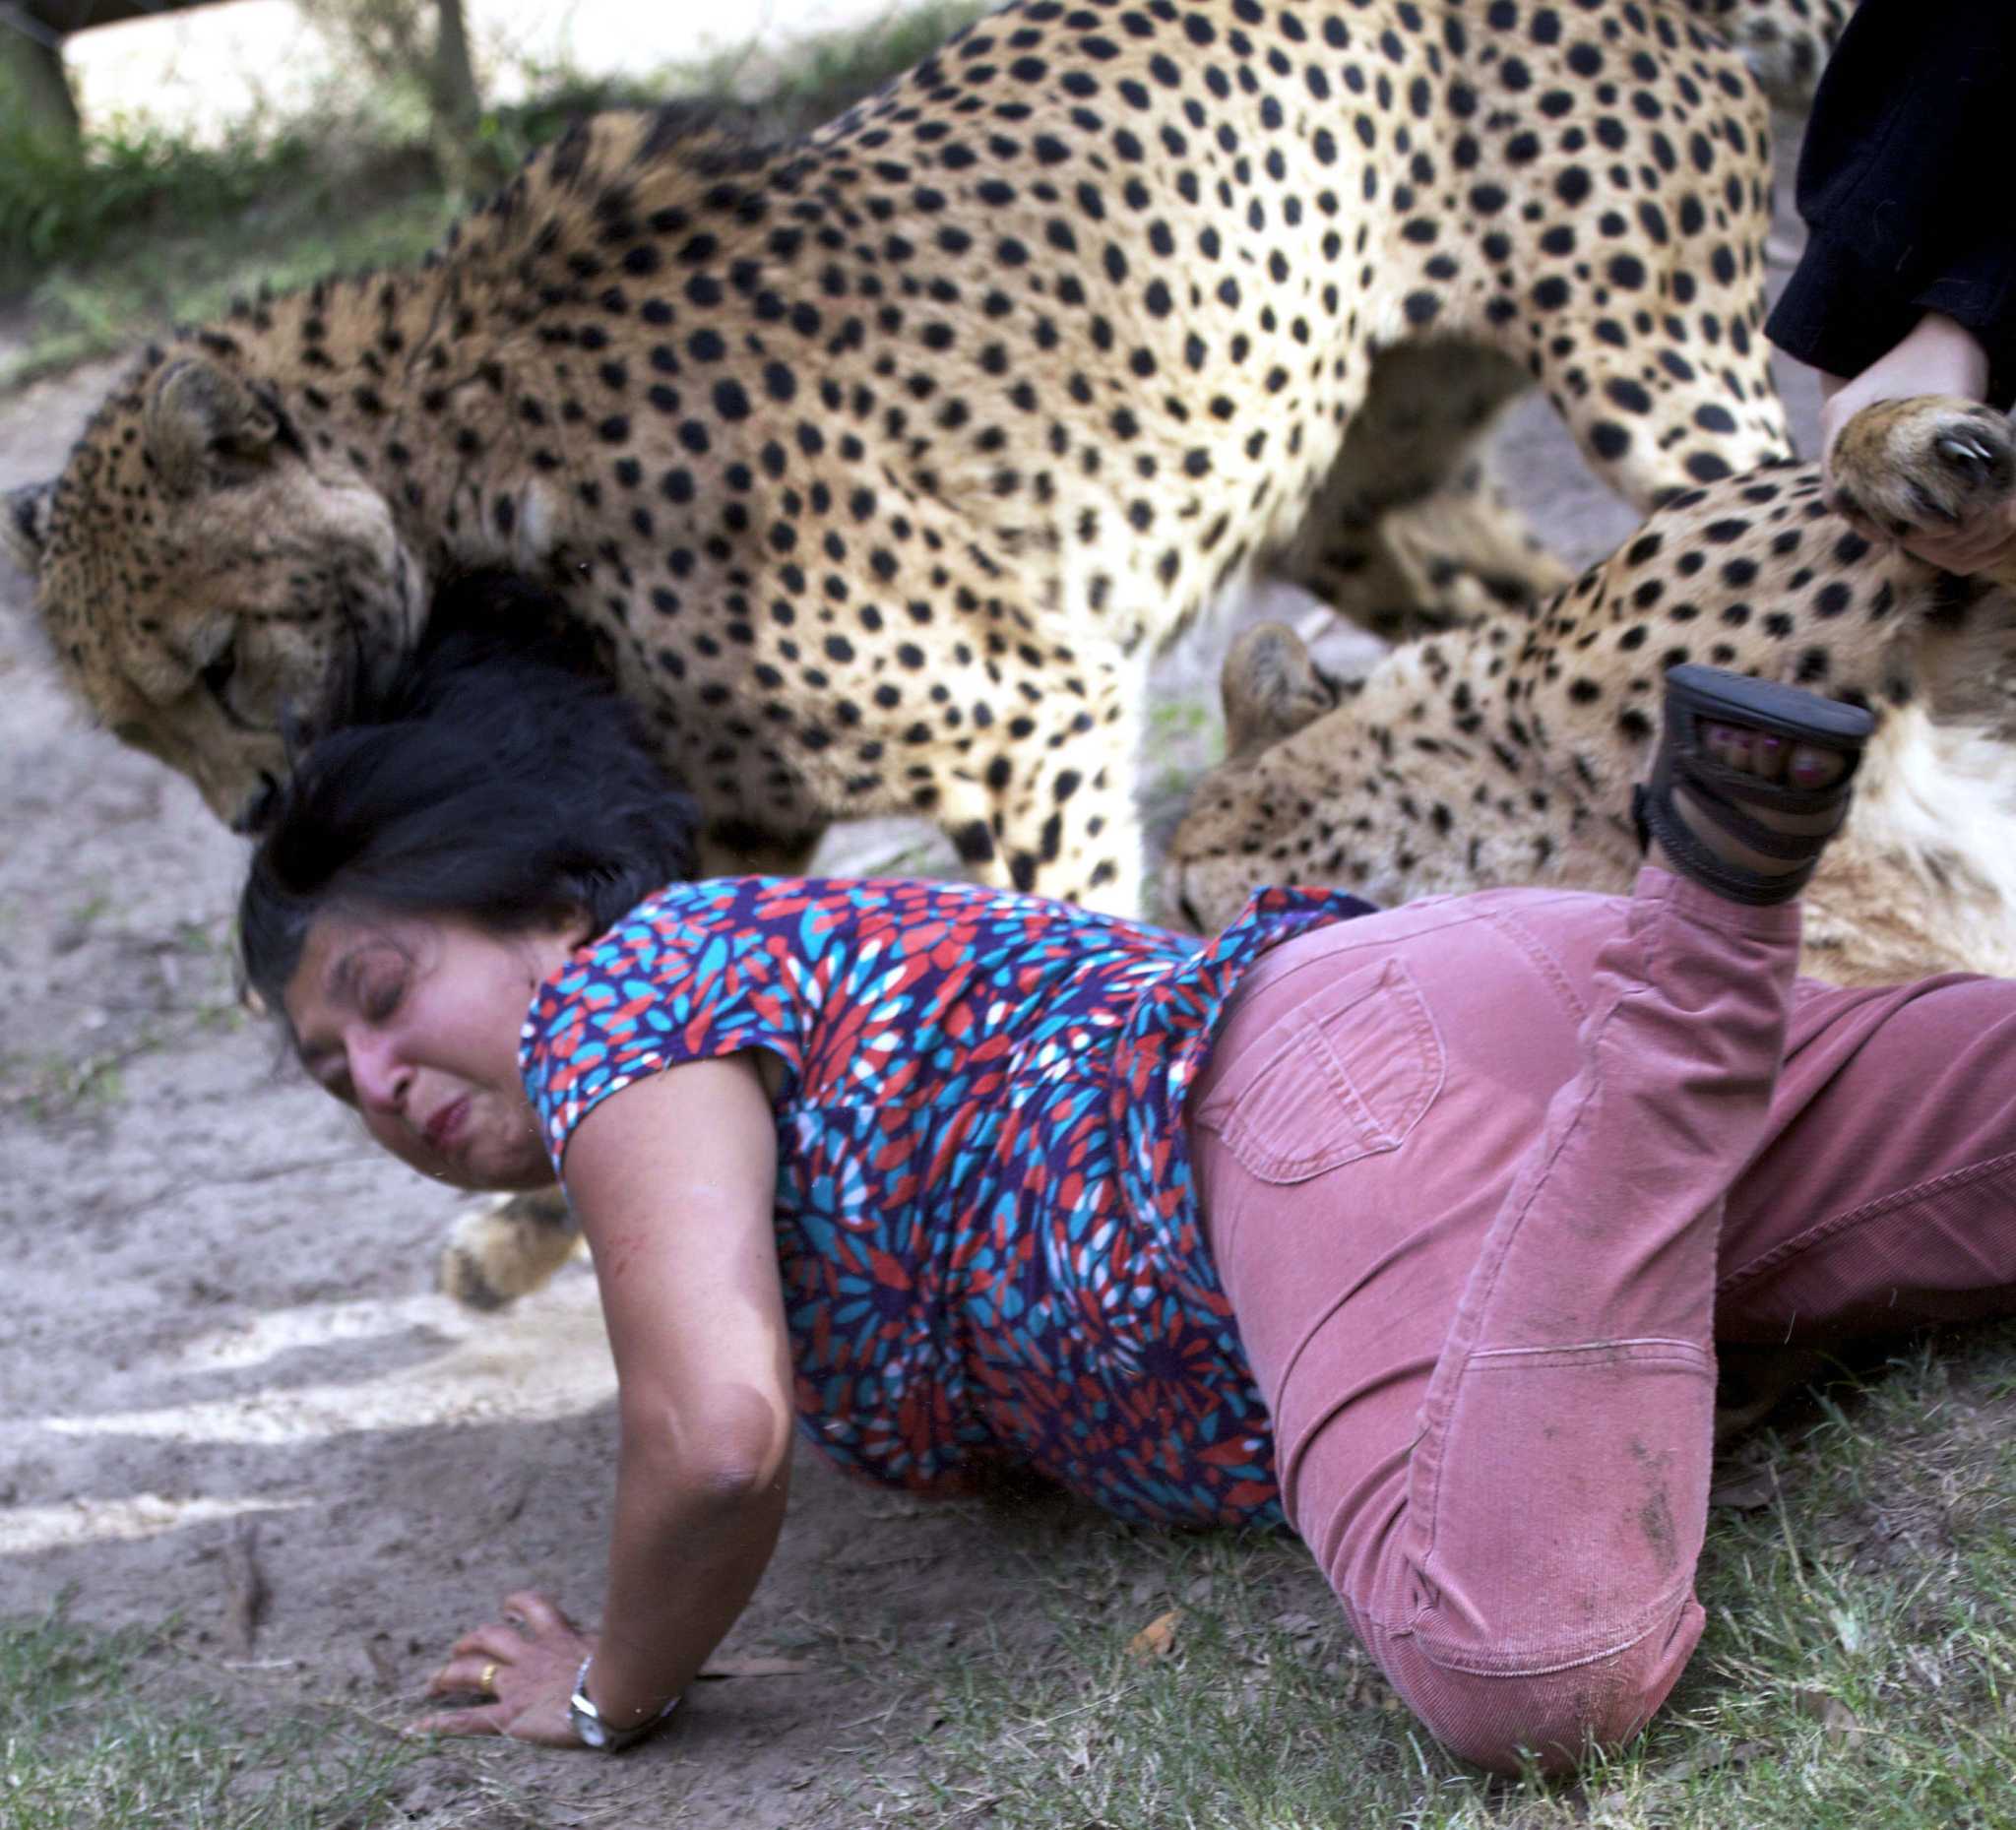 Woman terrified as leopards launch surprise attack from behind.n - Malise